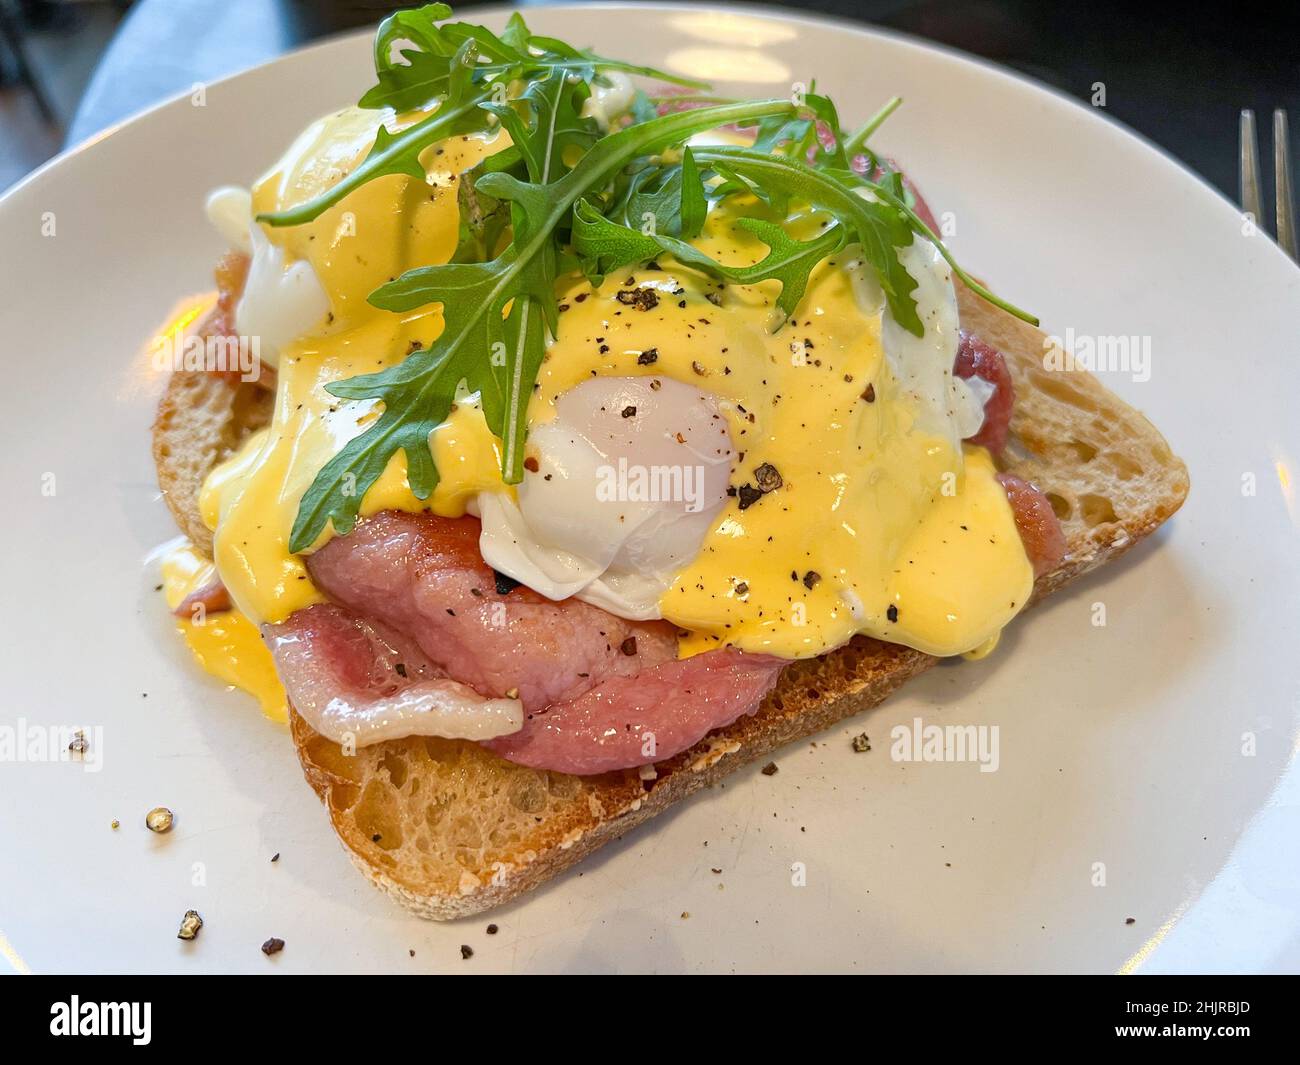 Eggs Benedict with bacon and garnish on toasted sour dough bread Stock Photo